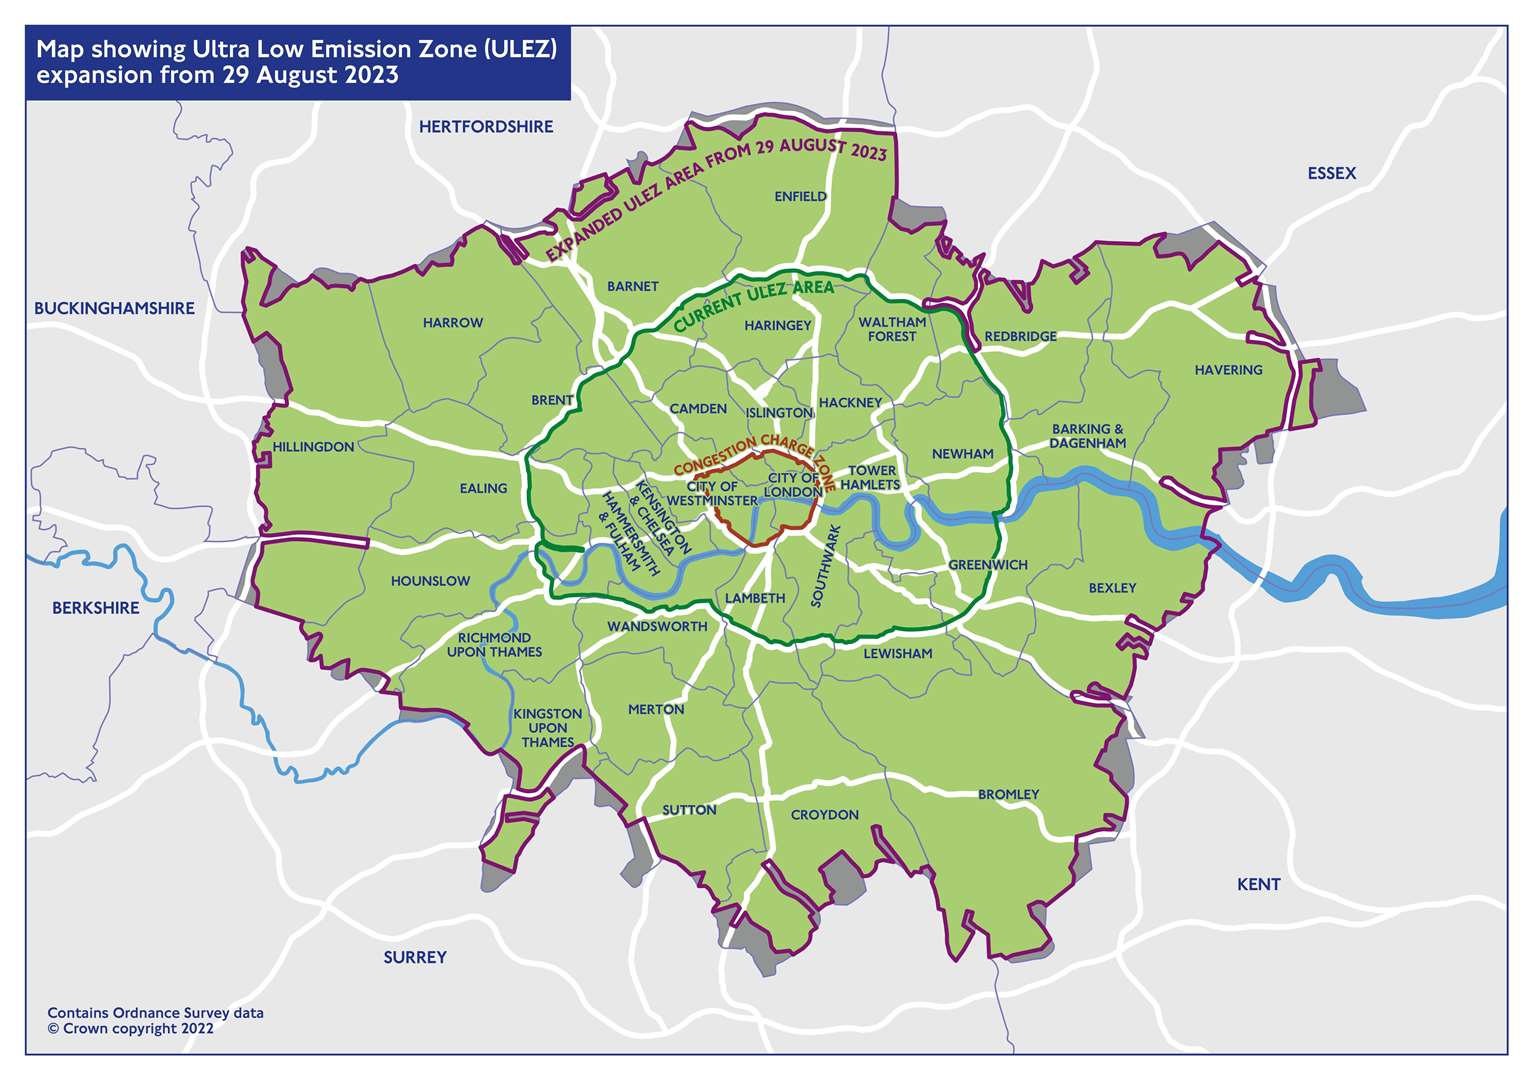 The Ultra Low Emission Zone expansion from August 29